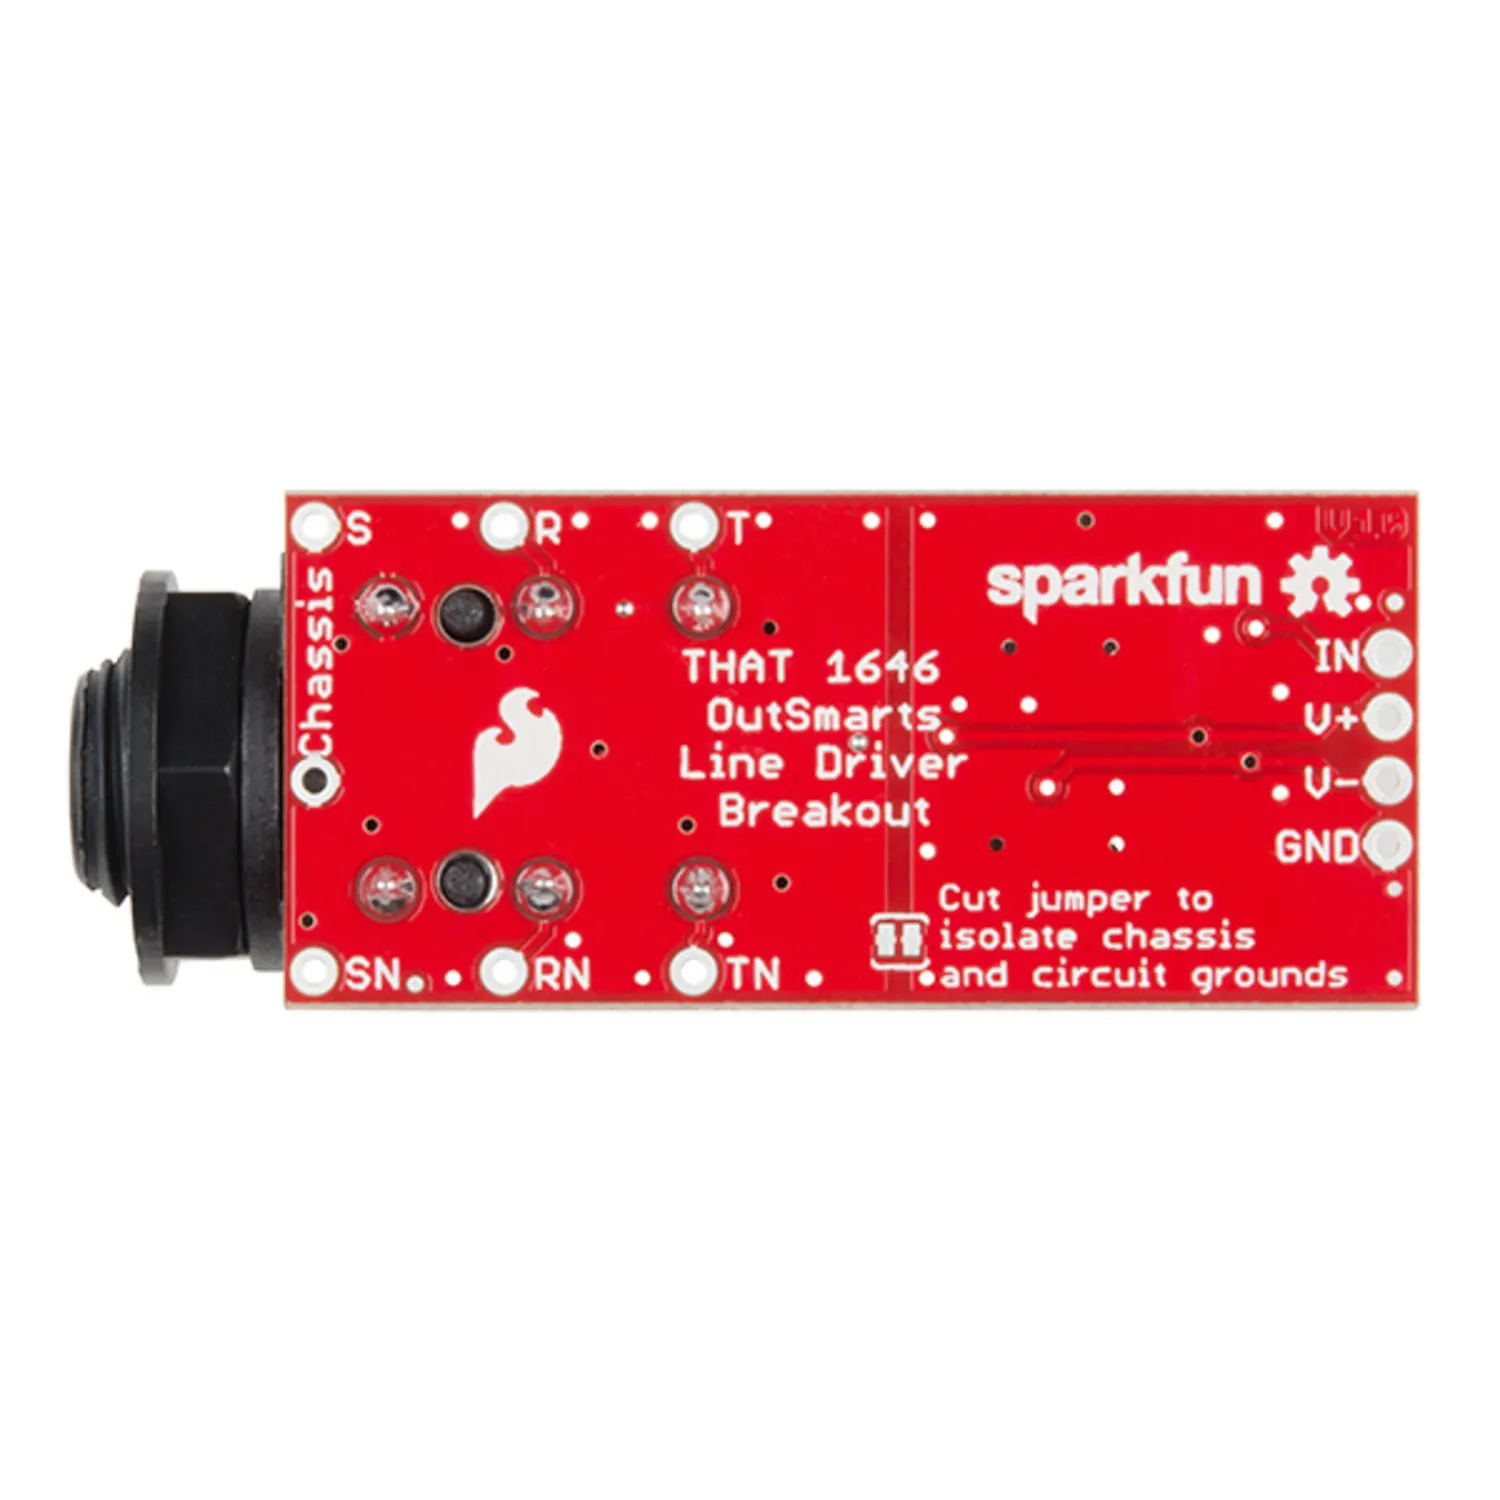 Photo of SparkFun THAT 1646 OutSmarts Breakout